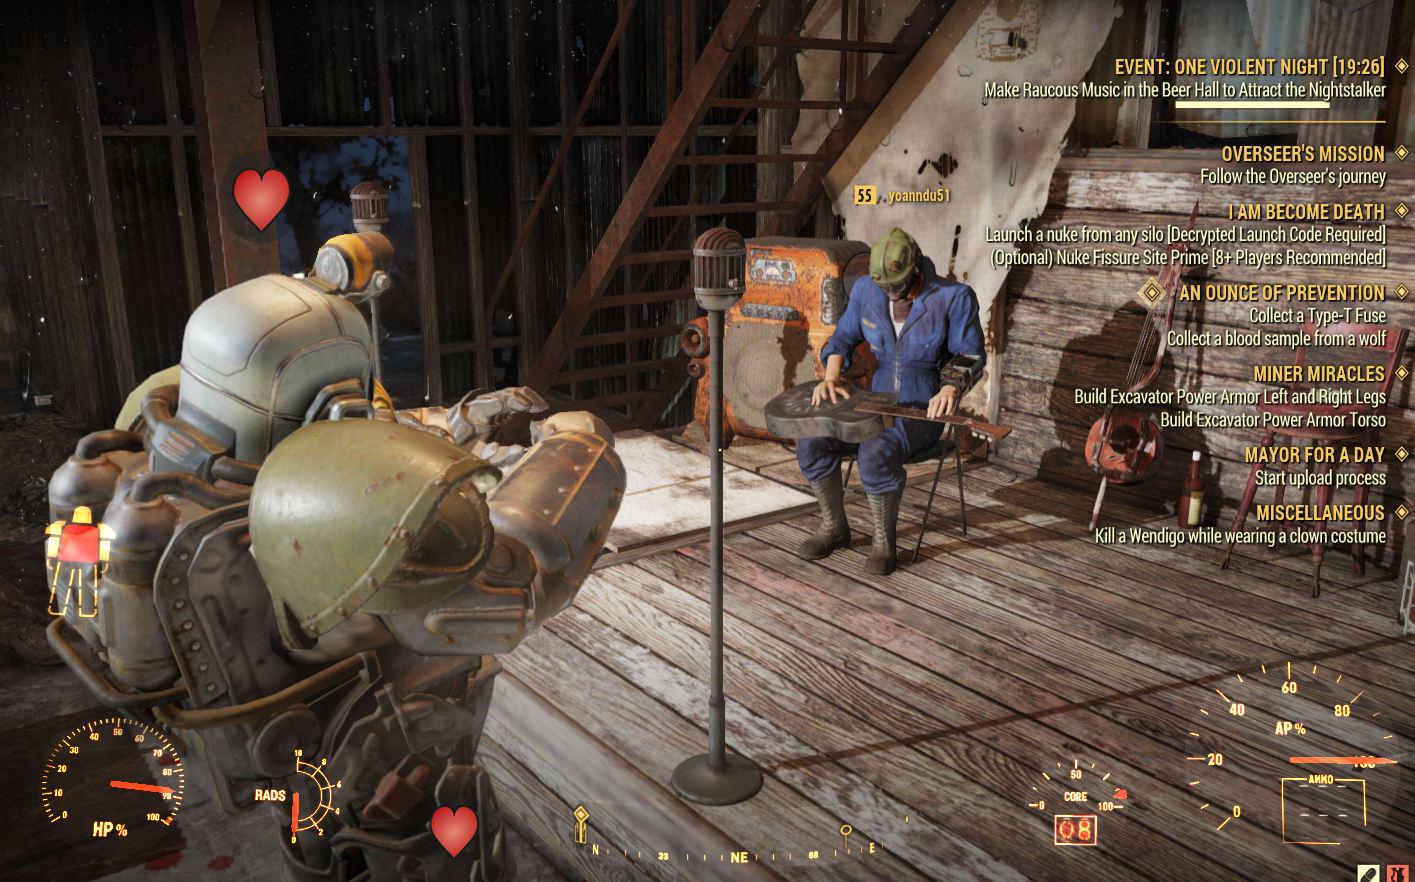 Fallout 76 leveling guide: 7 ways to easily farm XP